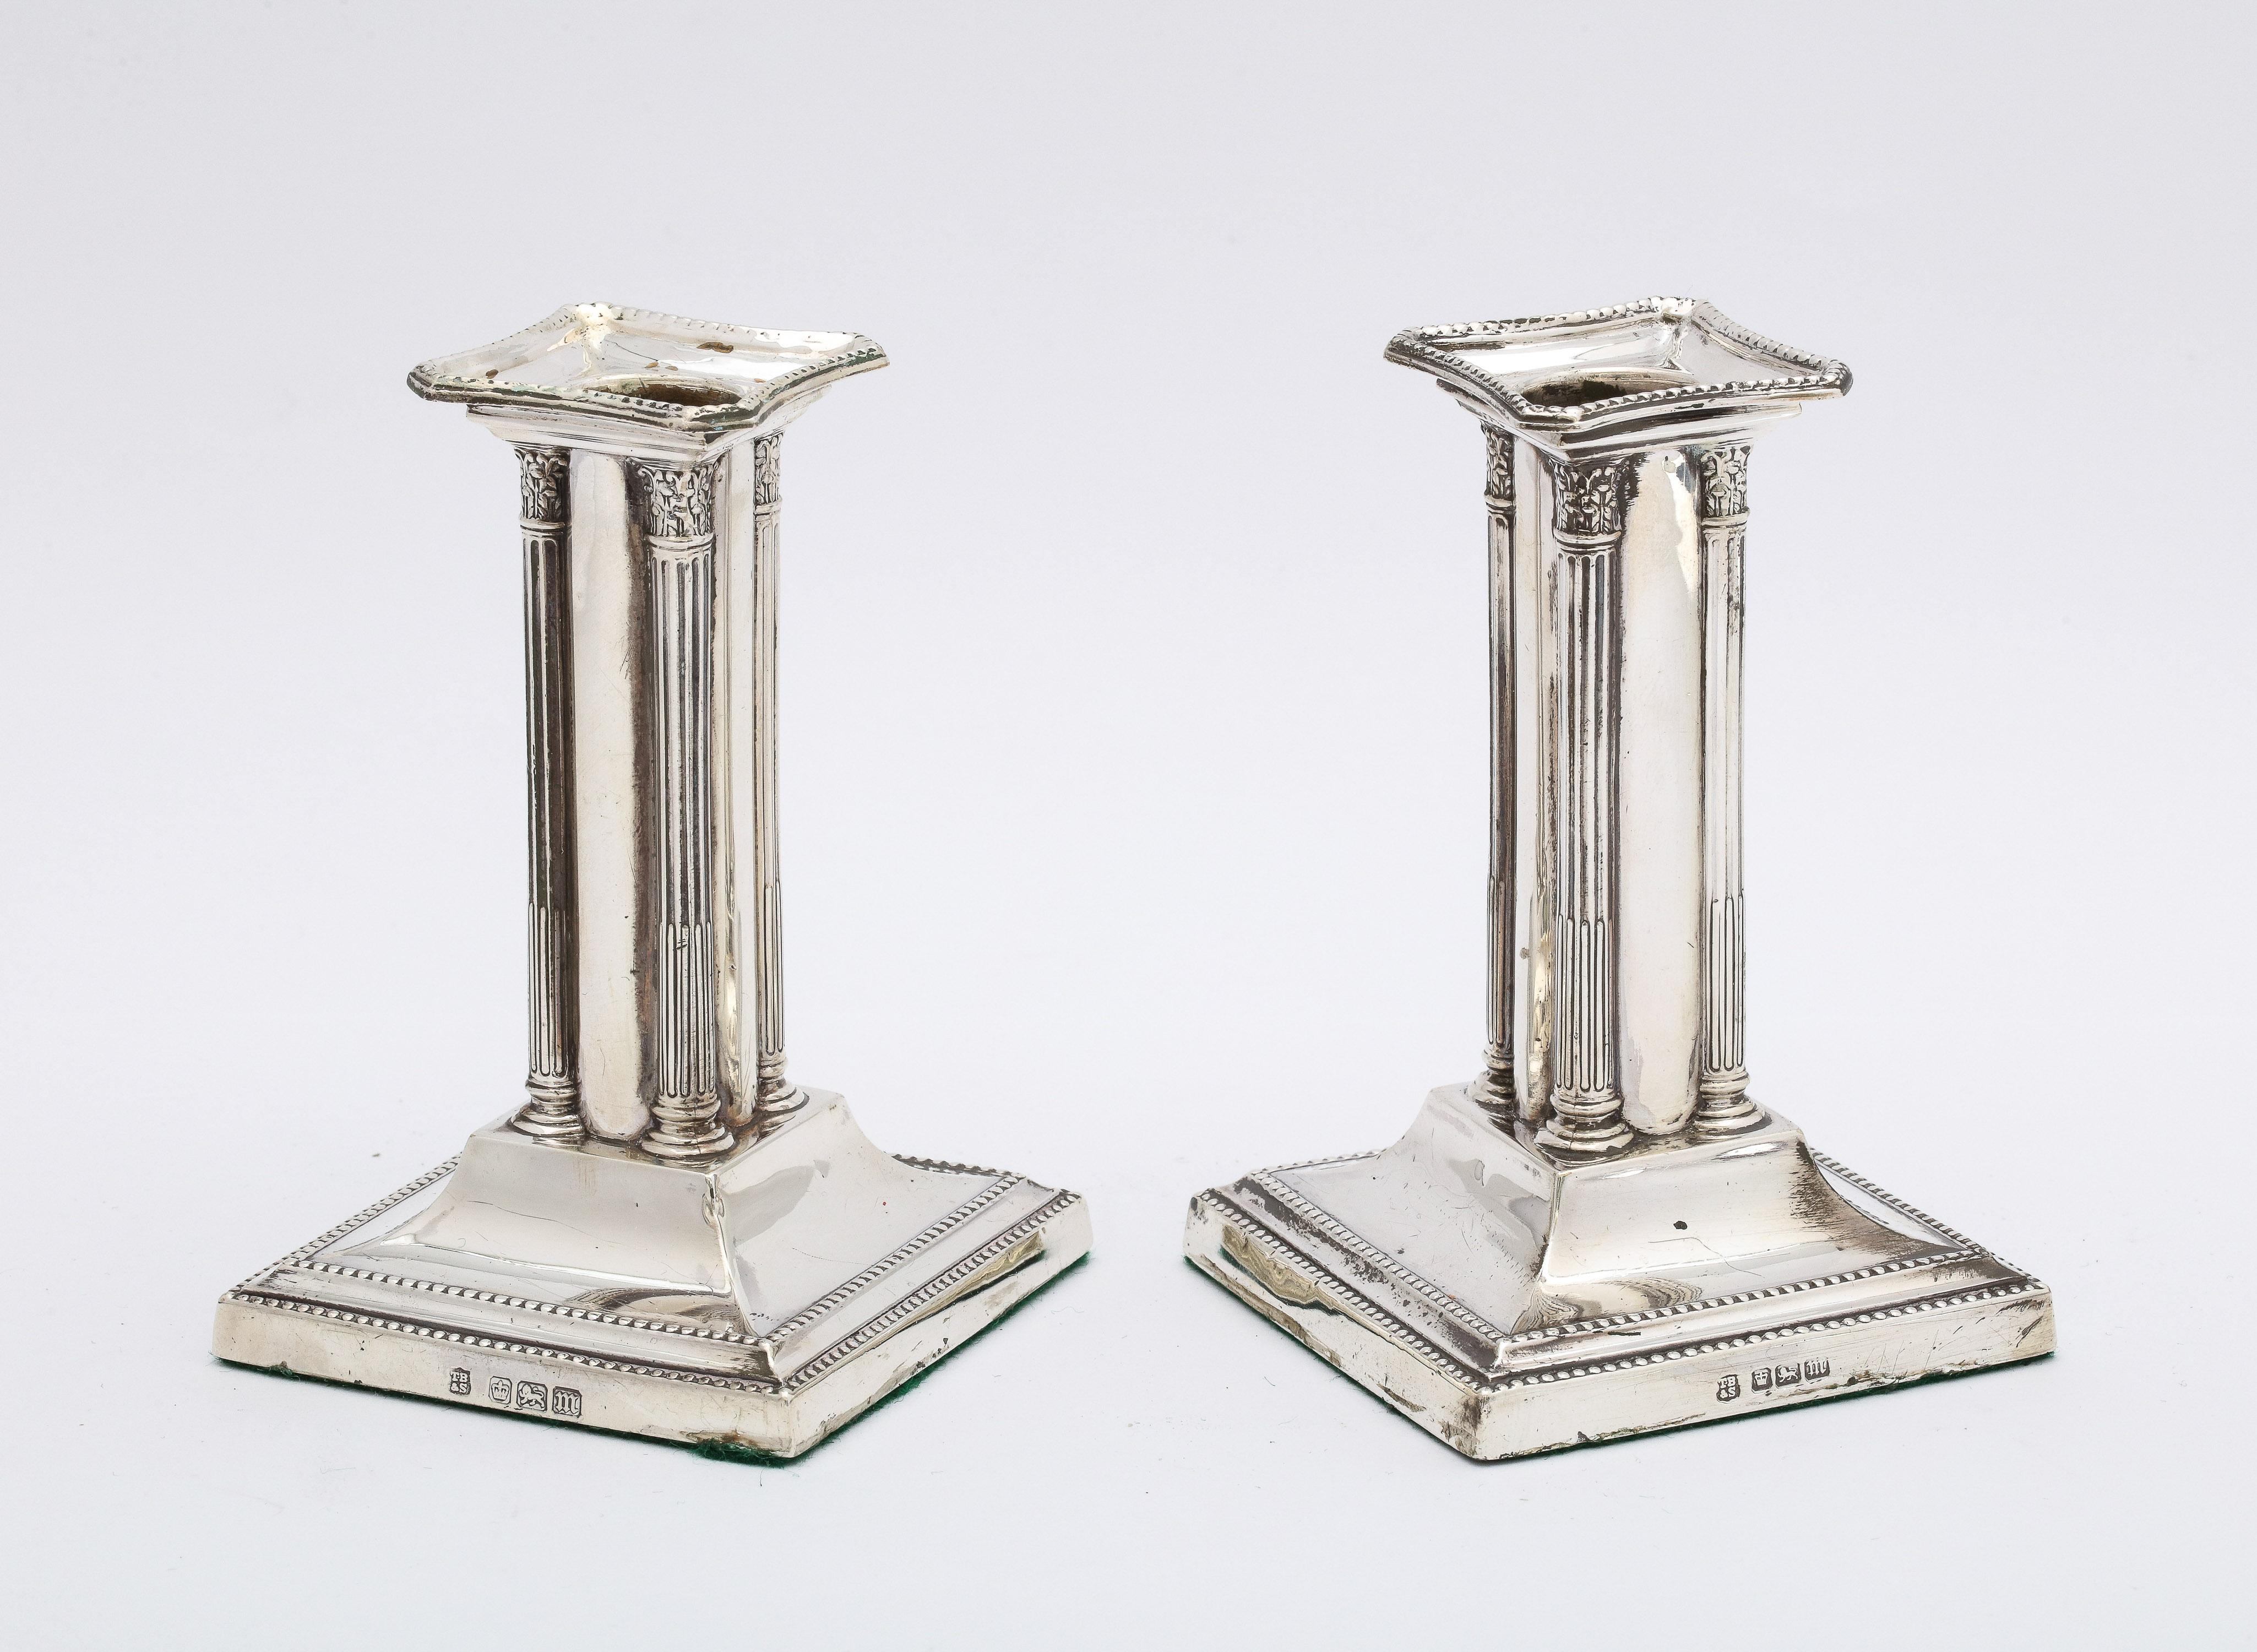 Unusual Pair of Edwardian Period Neoclassical Style Sterling Silver Candlesticks For Sale 5